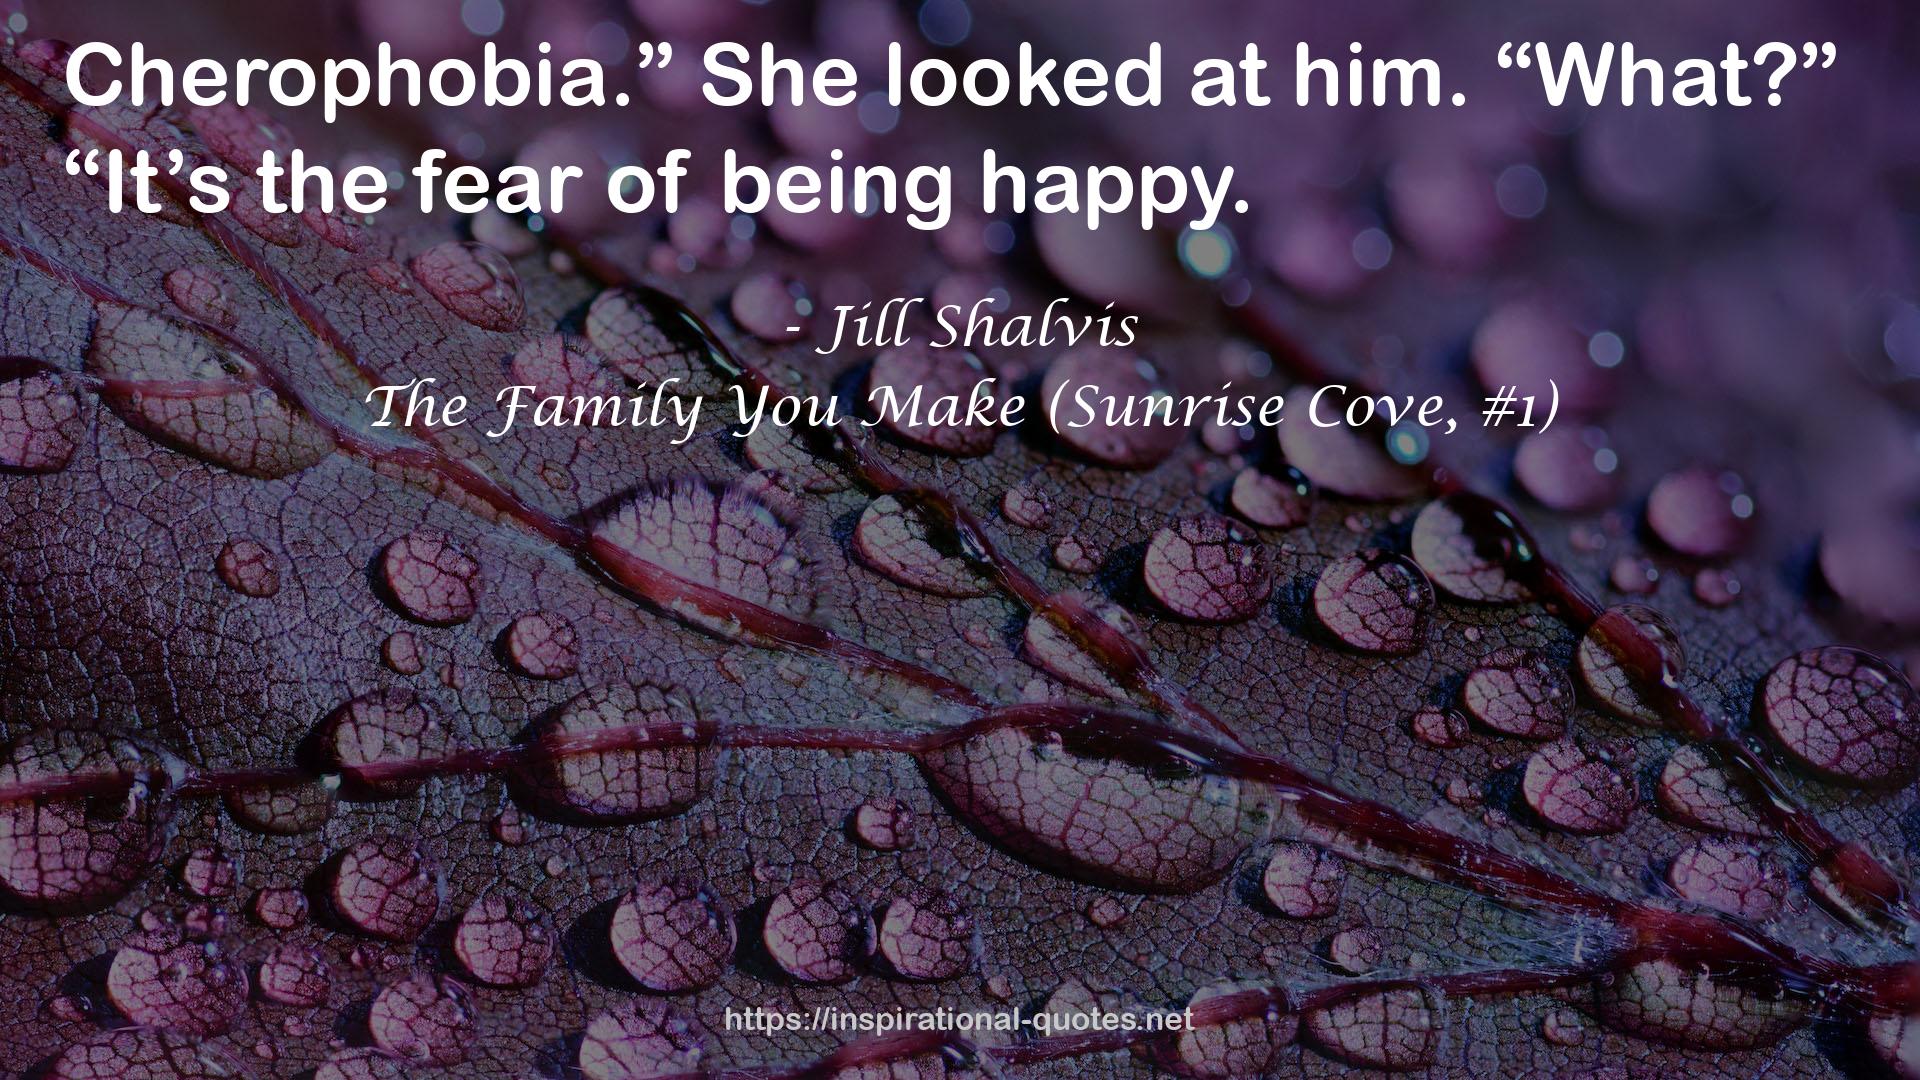 The Family You Make (Sunrise Cove, #1) QUOTES